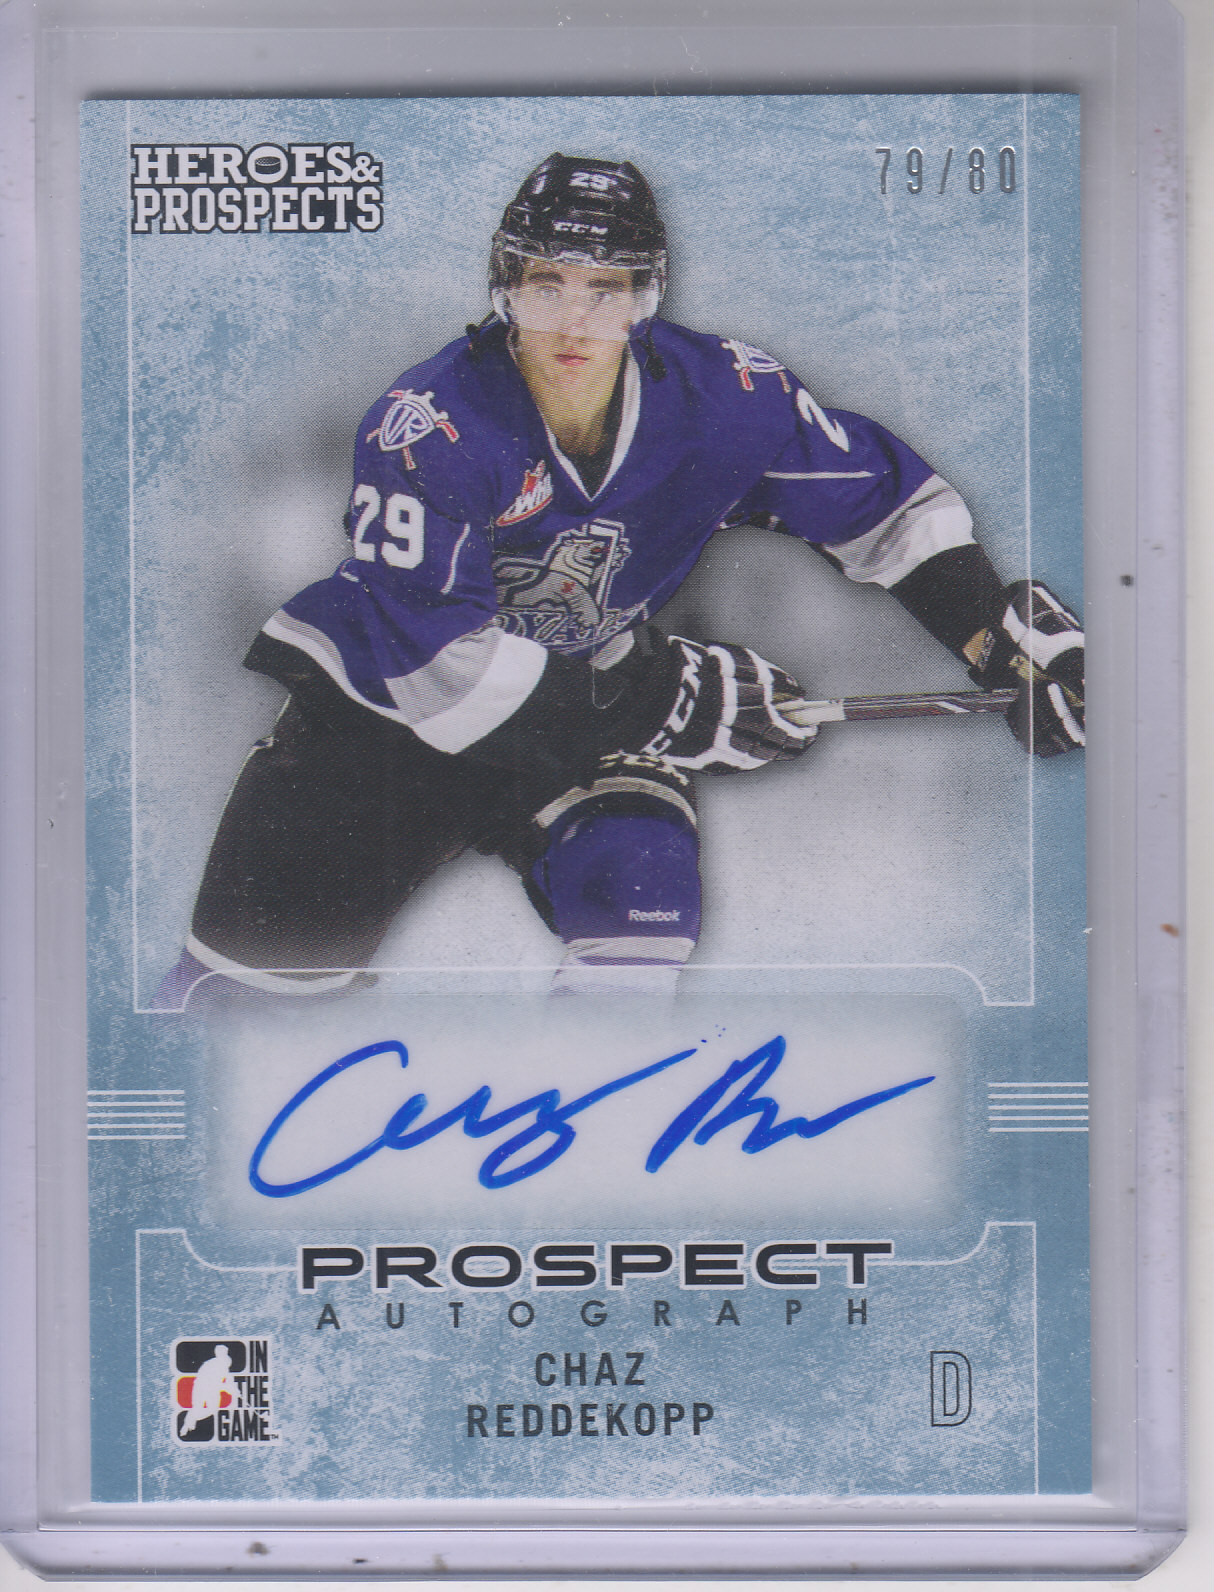 2014-15 ITG Heroes and Prospects Prospect Autographs #14 Chaz Reddekopp/80